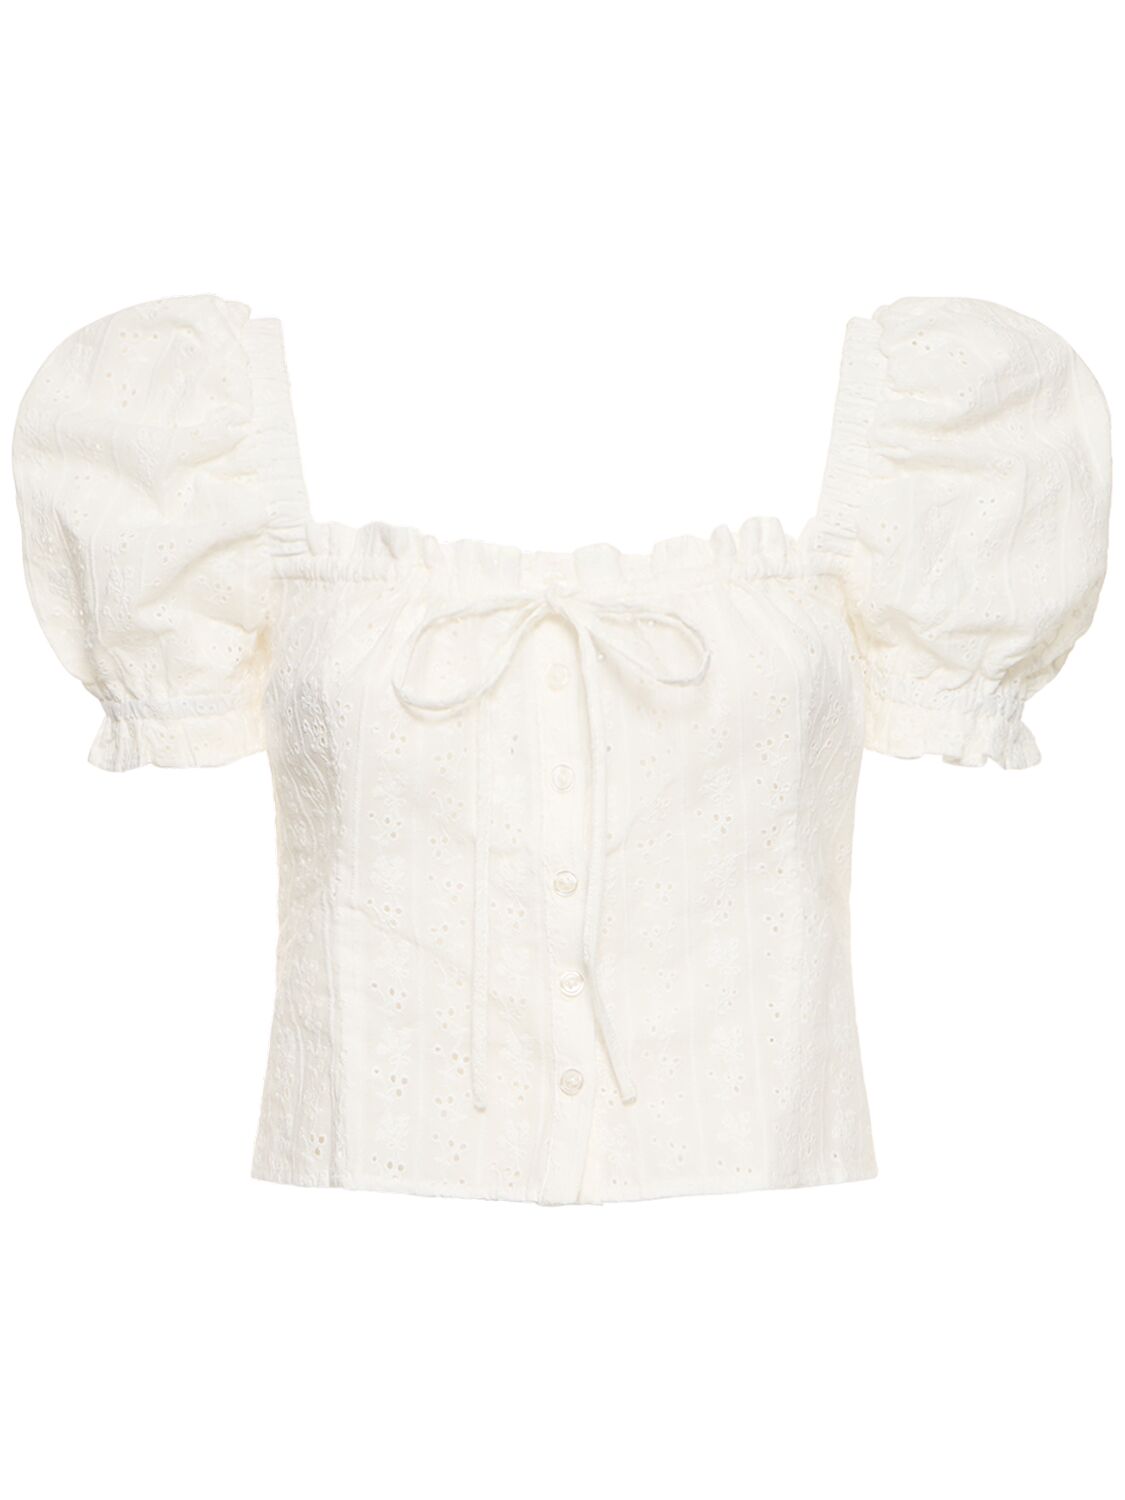 Cotton Eyelet Lace Puff Sleeve Top